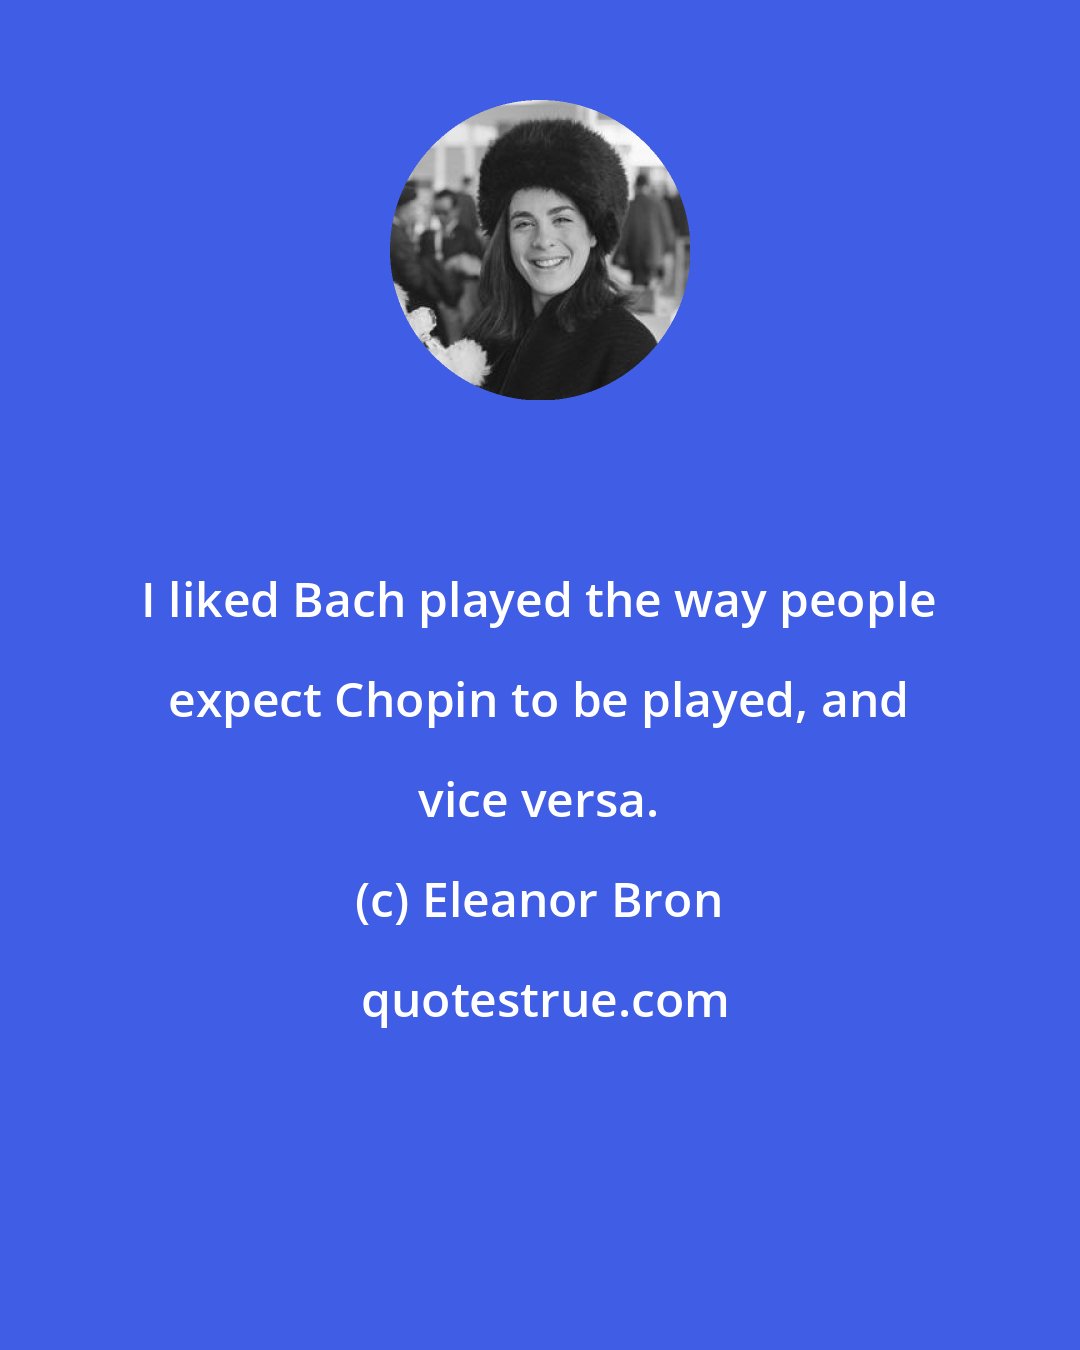 Eleanor Bron: I liked Bach played the way people expect Chopin to be played, and vice versa.